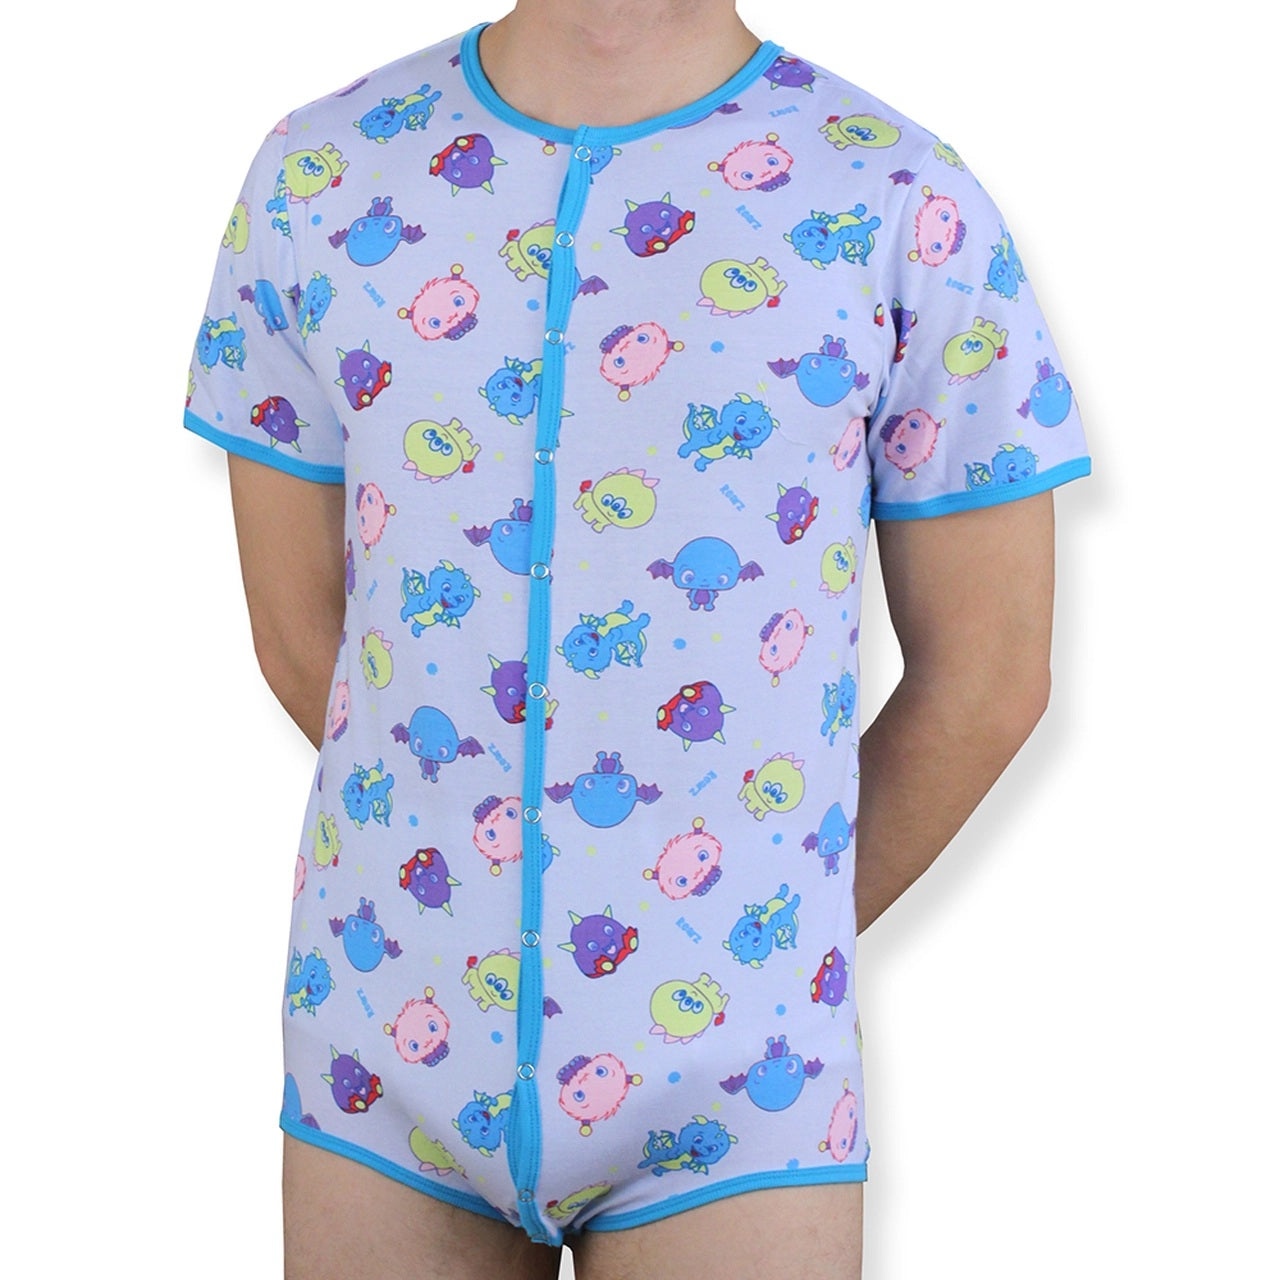 The Lil' Monsters Rearz Printed Onesie front view on pale skin model